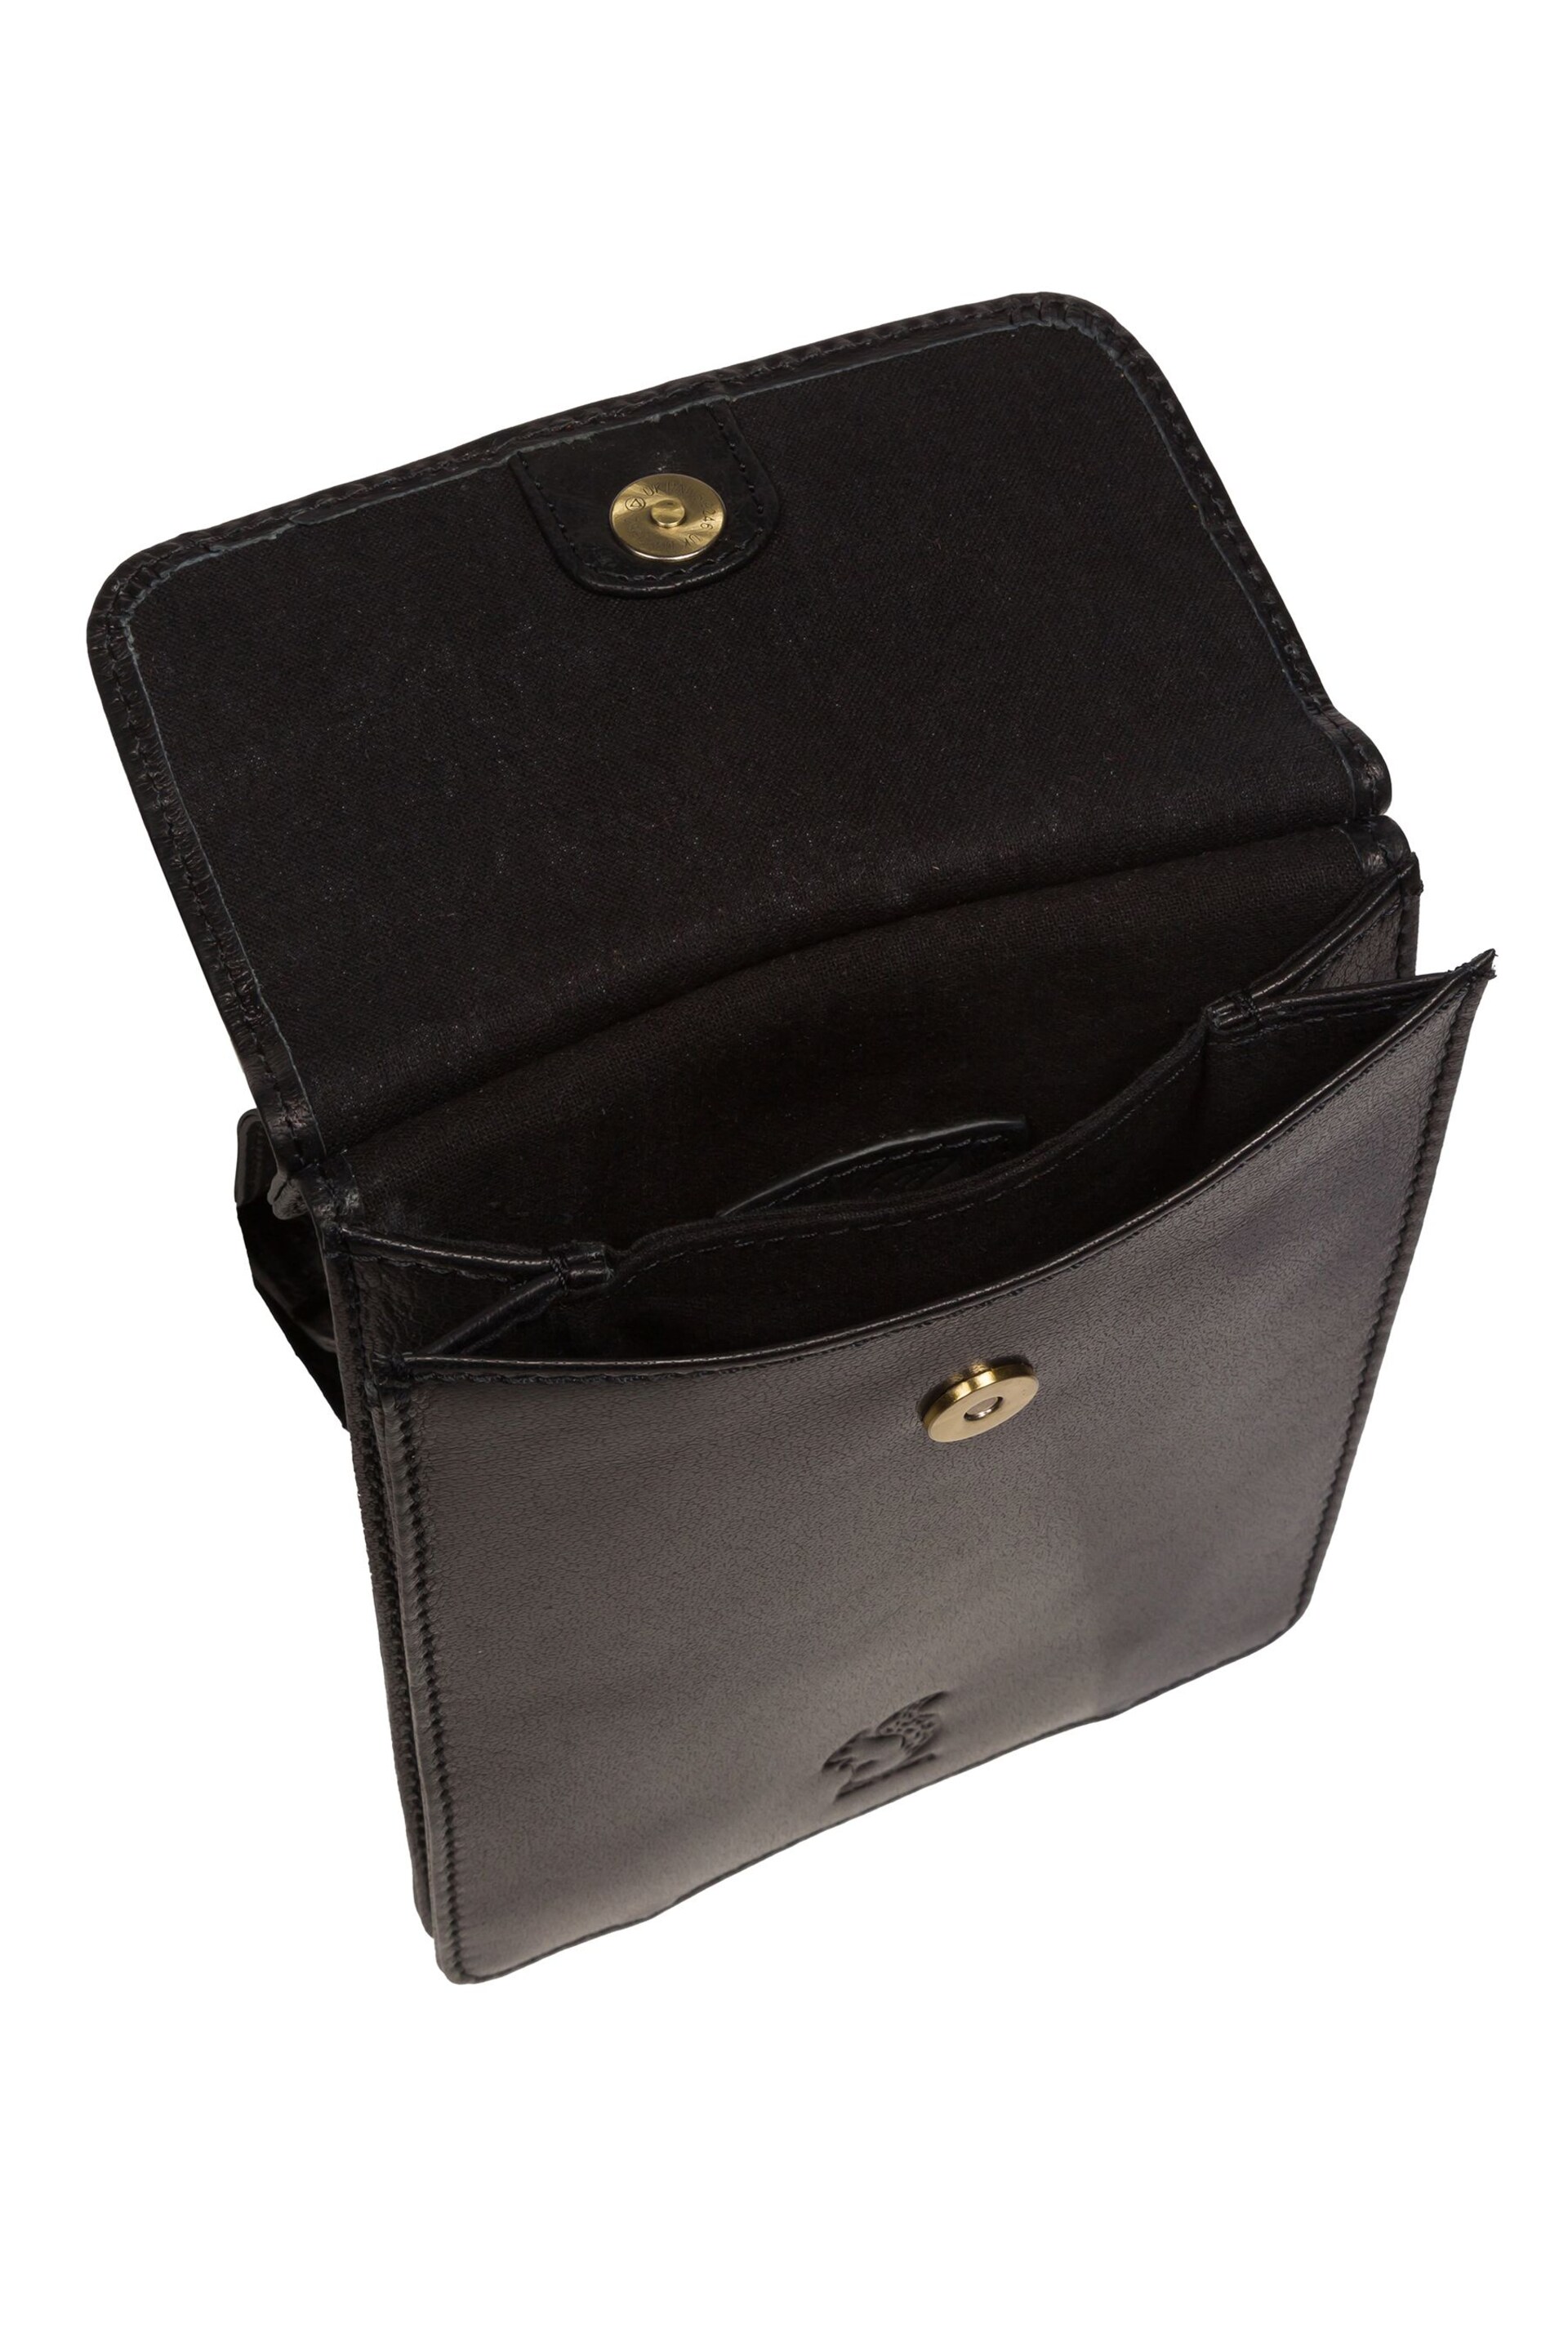 Conkca 'Milly' Leather Cross-Body Phone Black Bag - Image 5 of 6